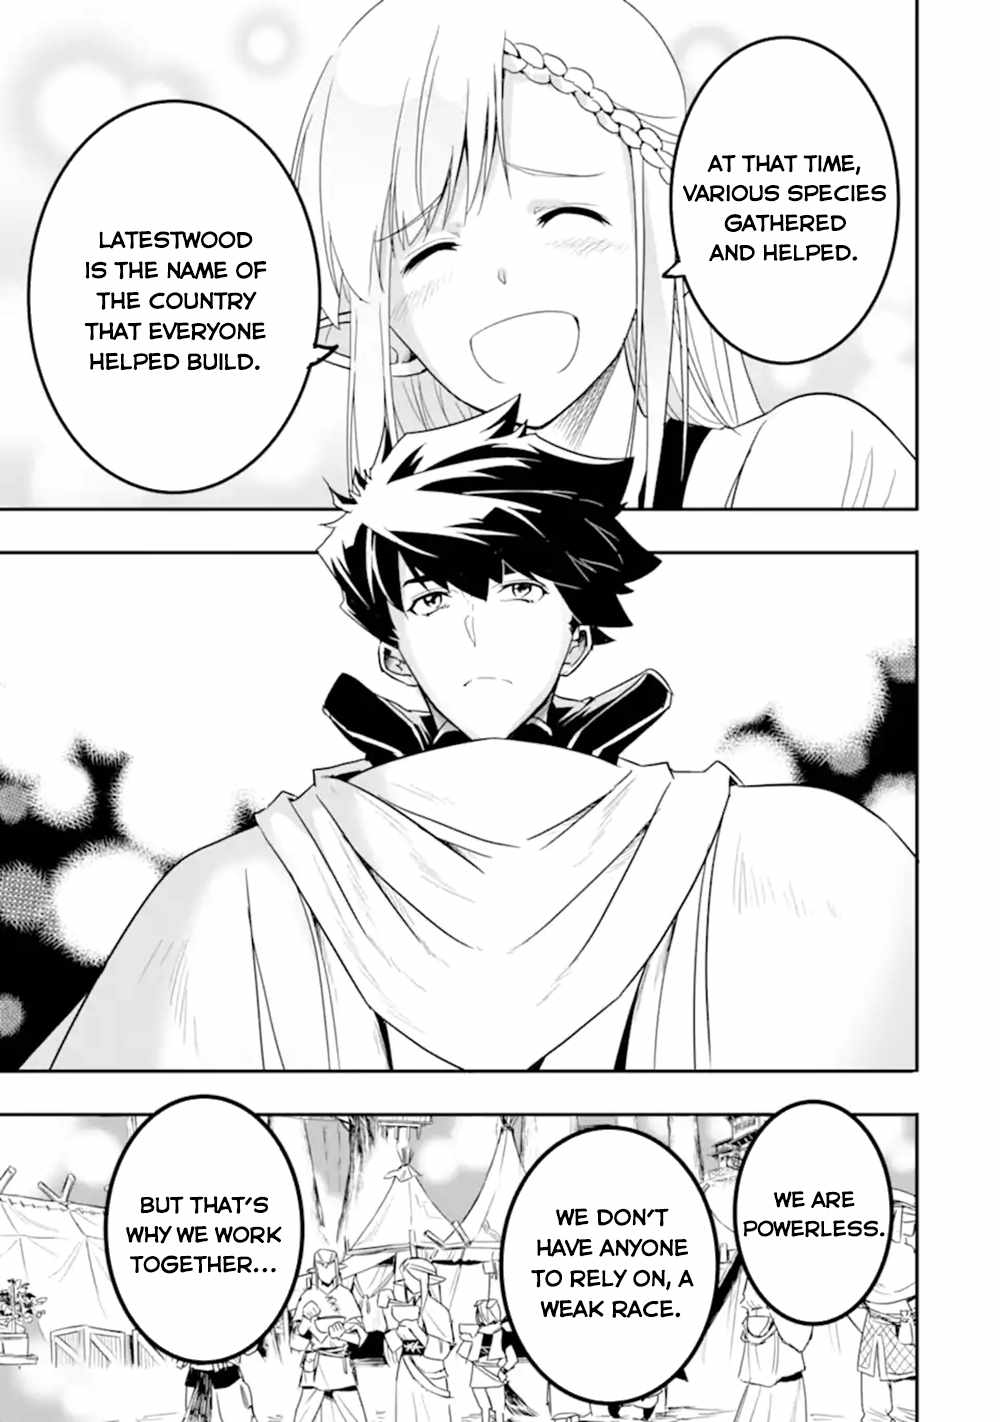 Another World Nation Archimaira: The Weakest King and his Unparalleled Army Chapter 6-2-eng-li - Page 3